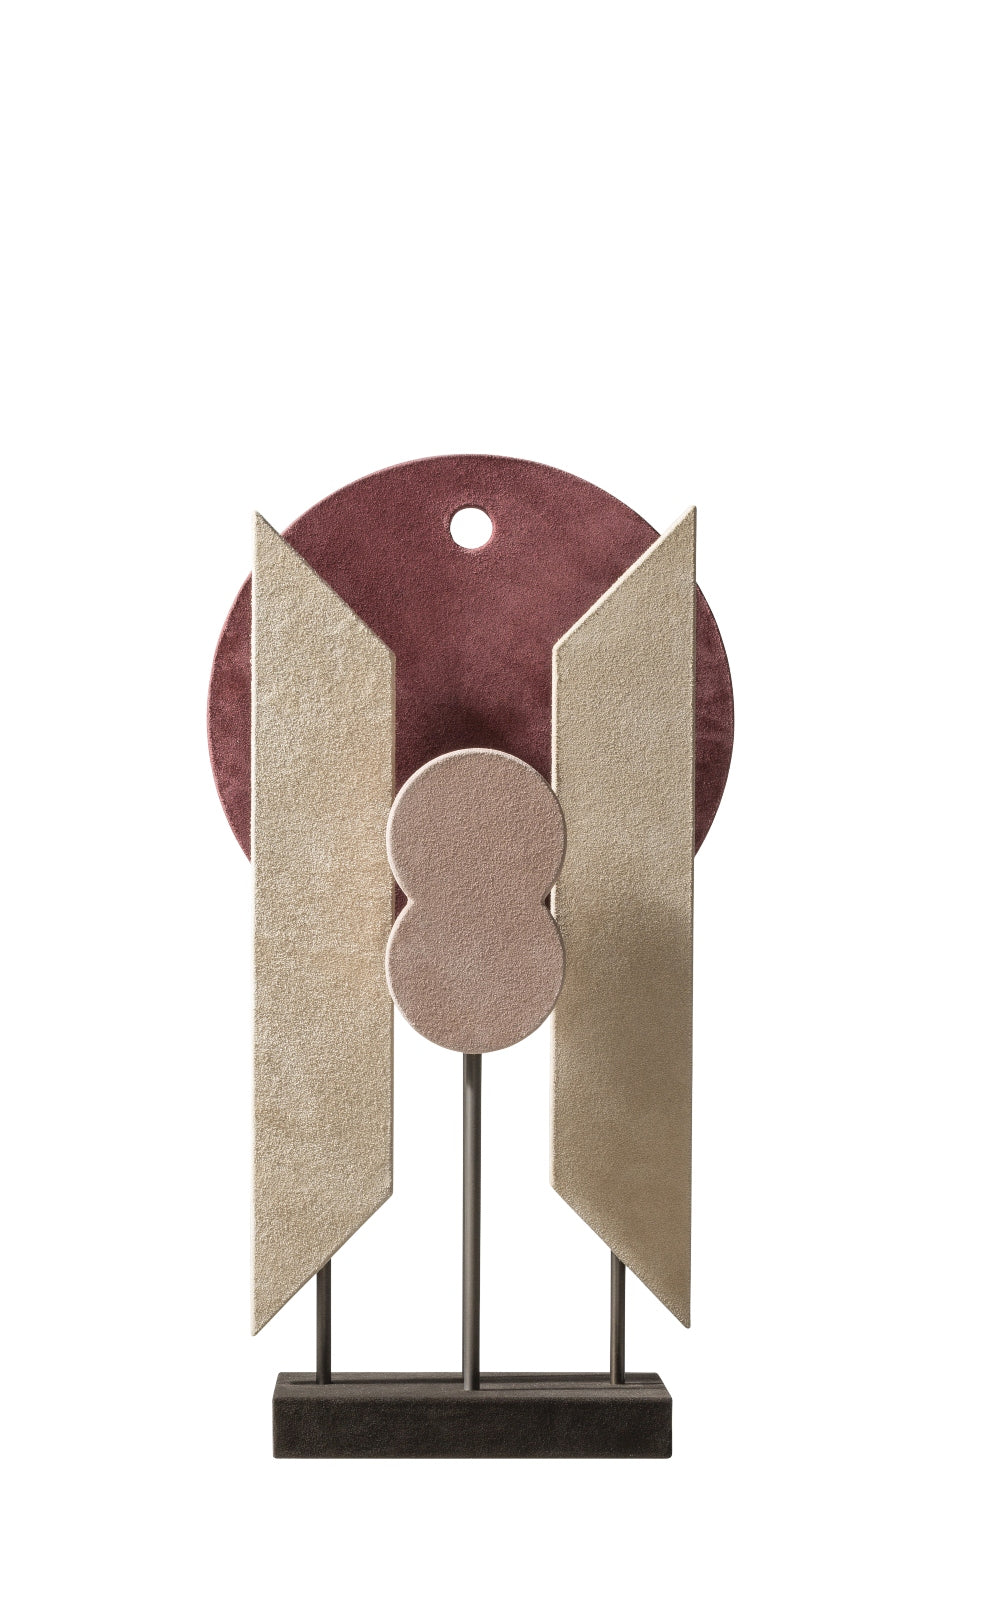 Giobagnara x Stéphane Parmentier: Suede-Covered Wood Tabou Sculpture 2 with Bronze Sticks | Artistic Home Decor, Elegant Sculpture & Collectible Items | 2Jour Concierge, #1 luxury high-end gift & lifestyle shop